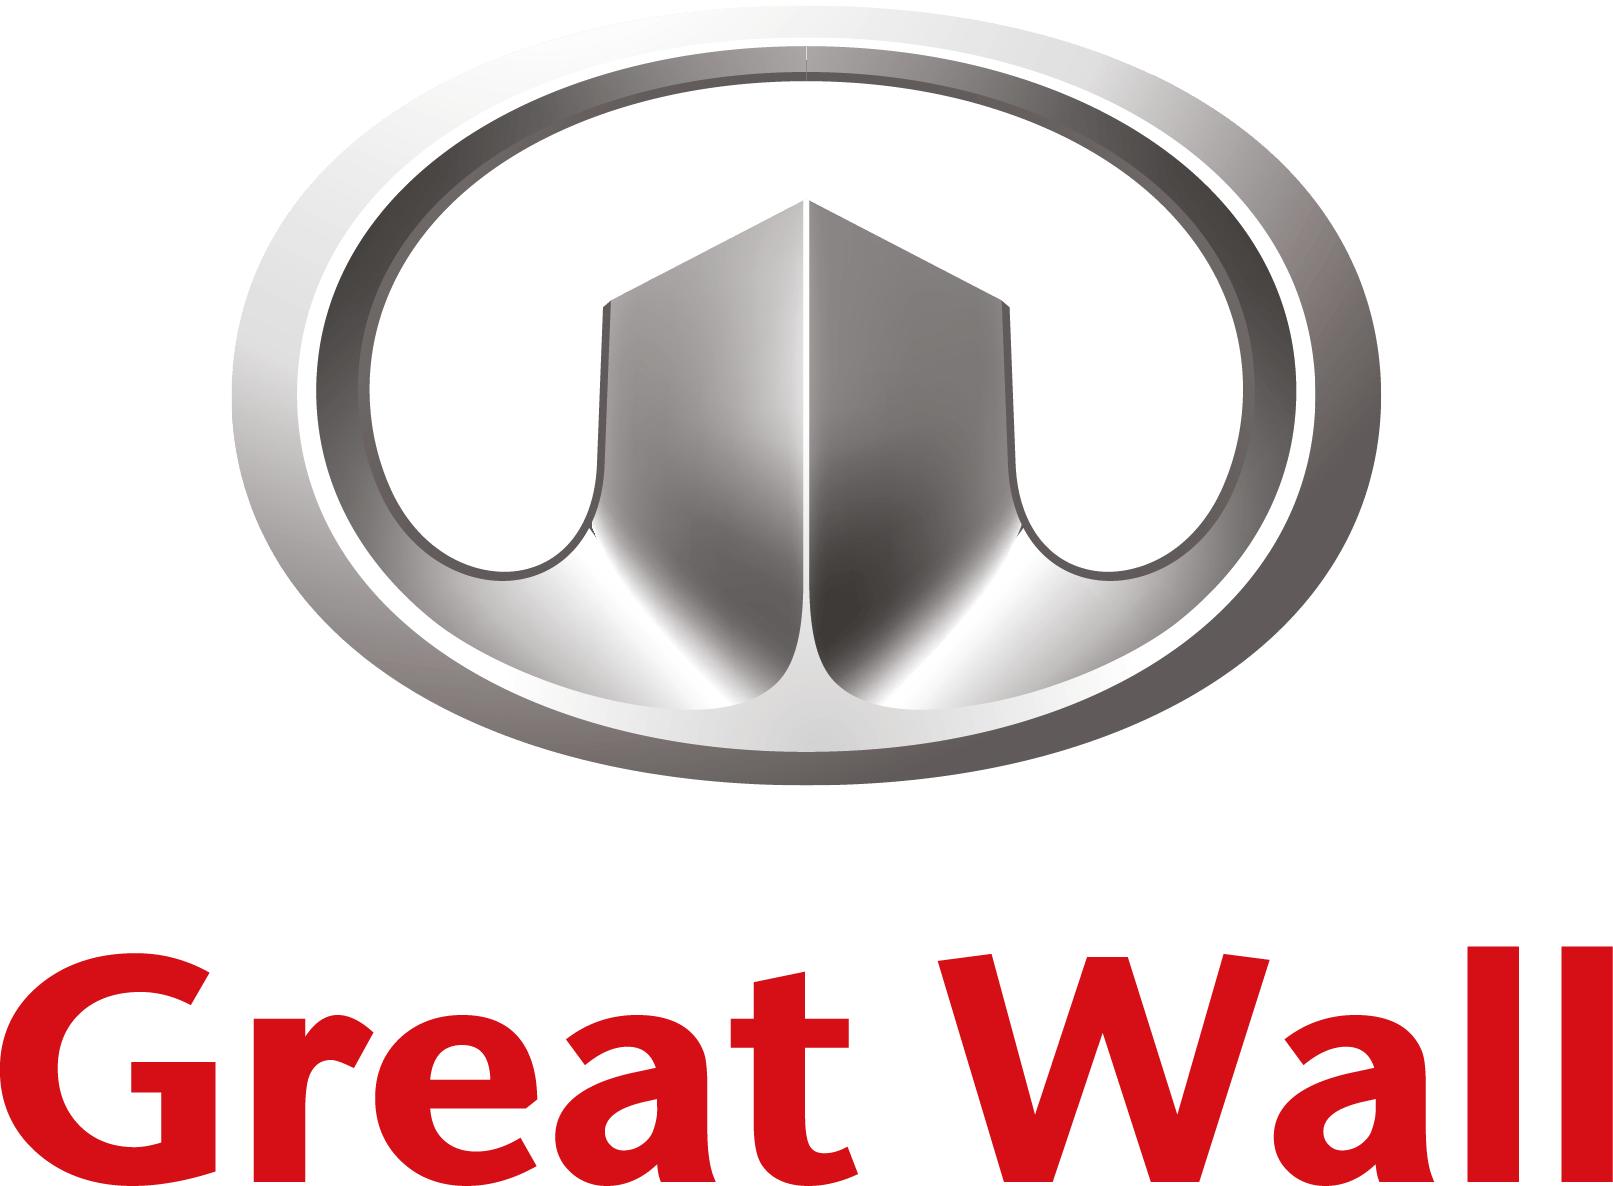 Great Title the Walls Logo - Great wall logo png 3 PNG Image